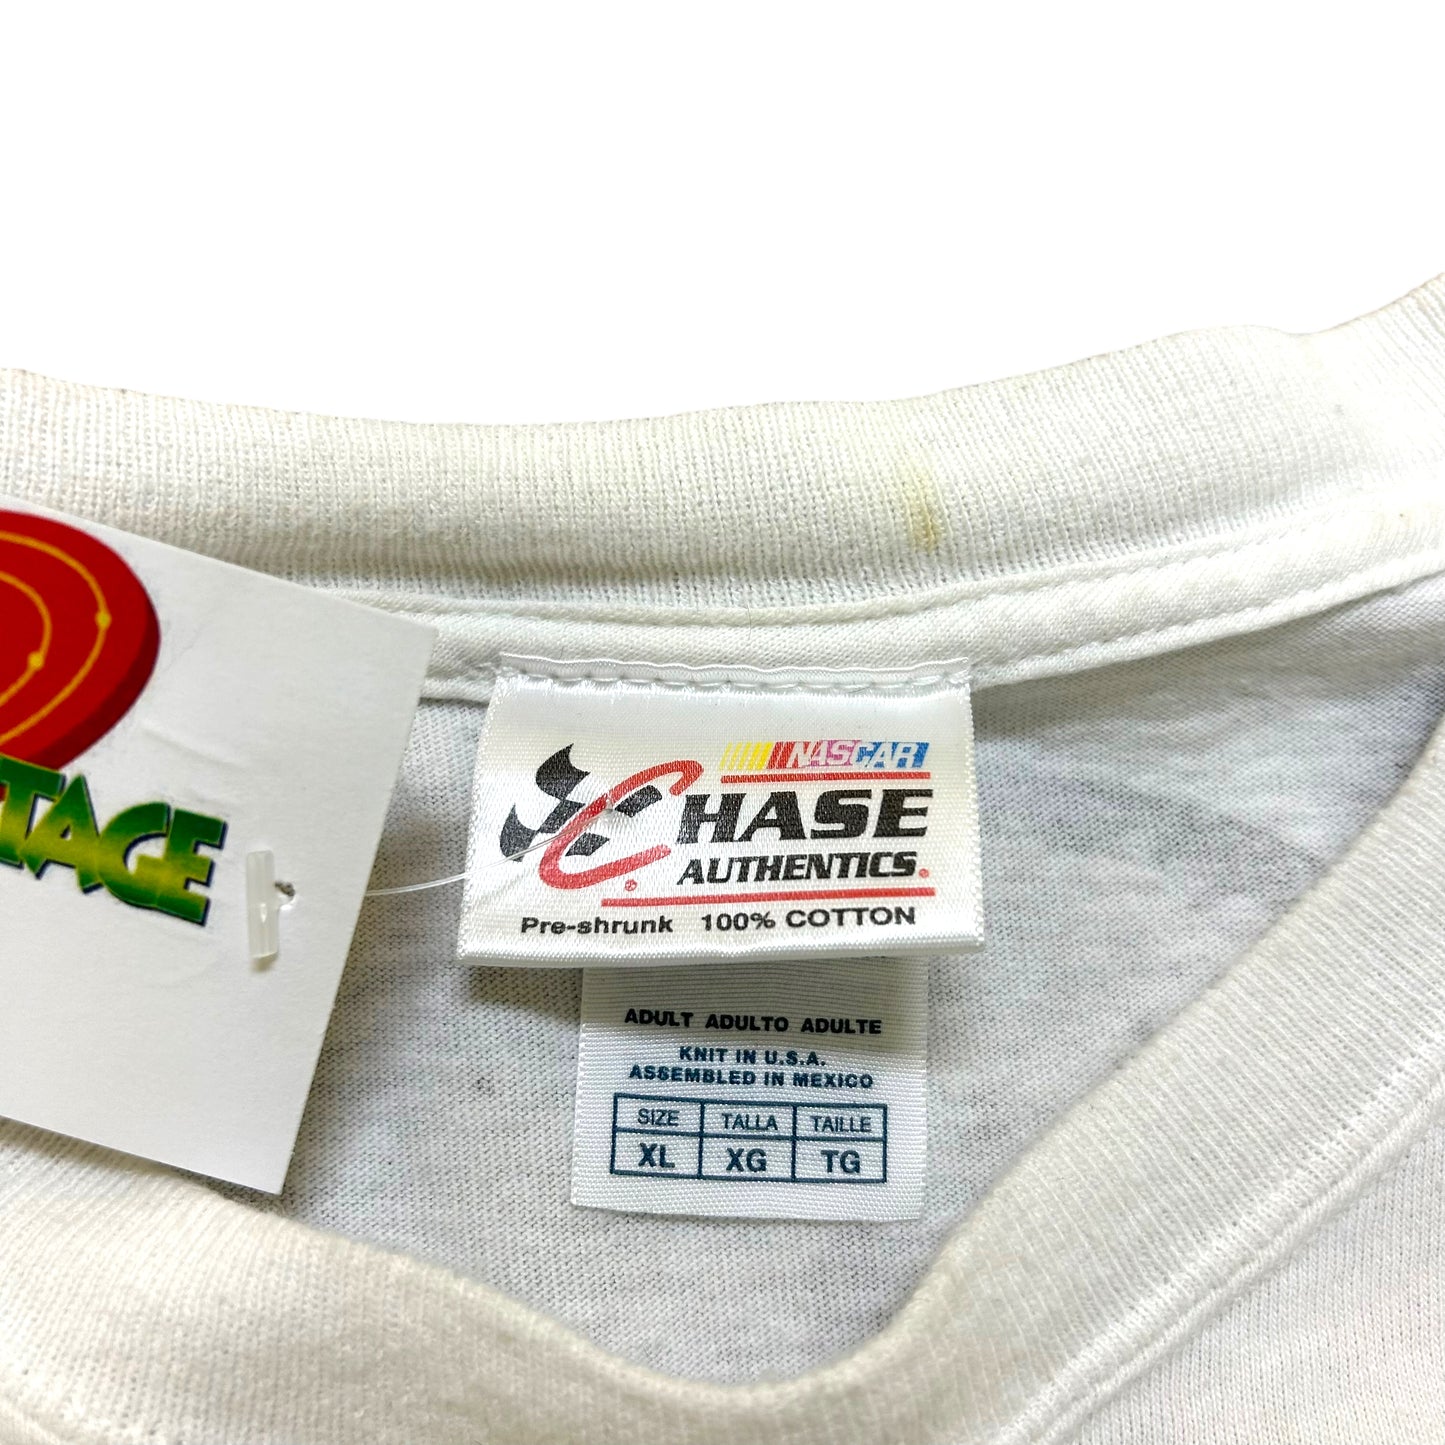 Y2K Dale Earnhardt Jr Amp Energy “Fuel Your Passion” NASCAR Racing White All Over Print Graphic T-Shirt - Size XL (Boxy Fit)